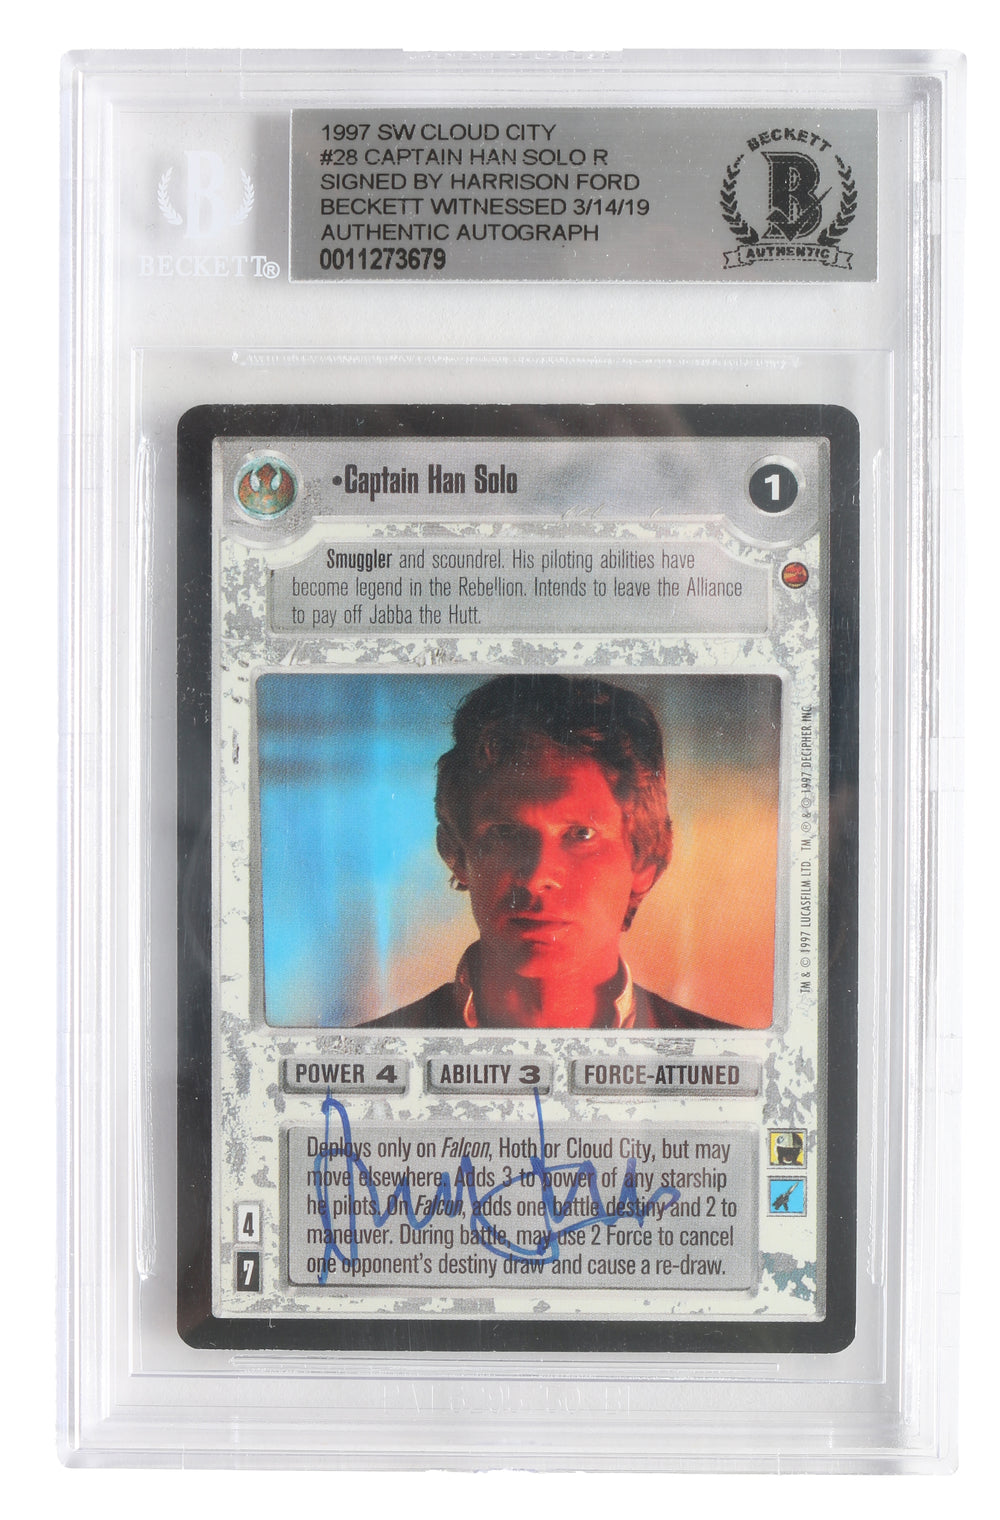 Harrison Ford as Han Solo in Star Wars: The Empire Strikes Back (Beckett Witnessed Slabbed) Signed Star Wars Customizable Card Game CCG #28 Trading Card 1997